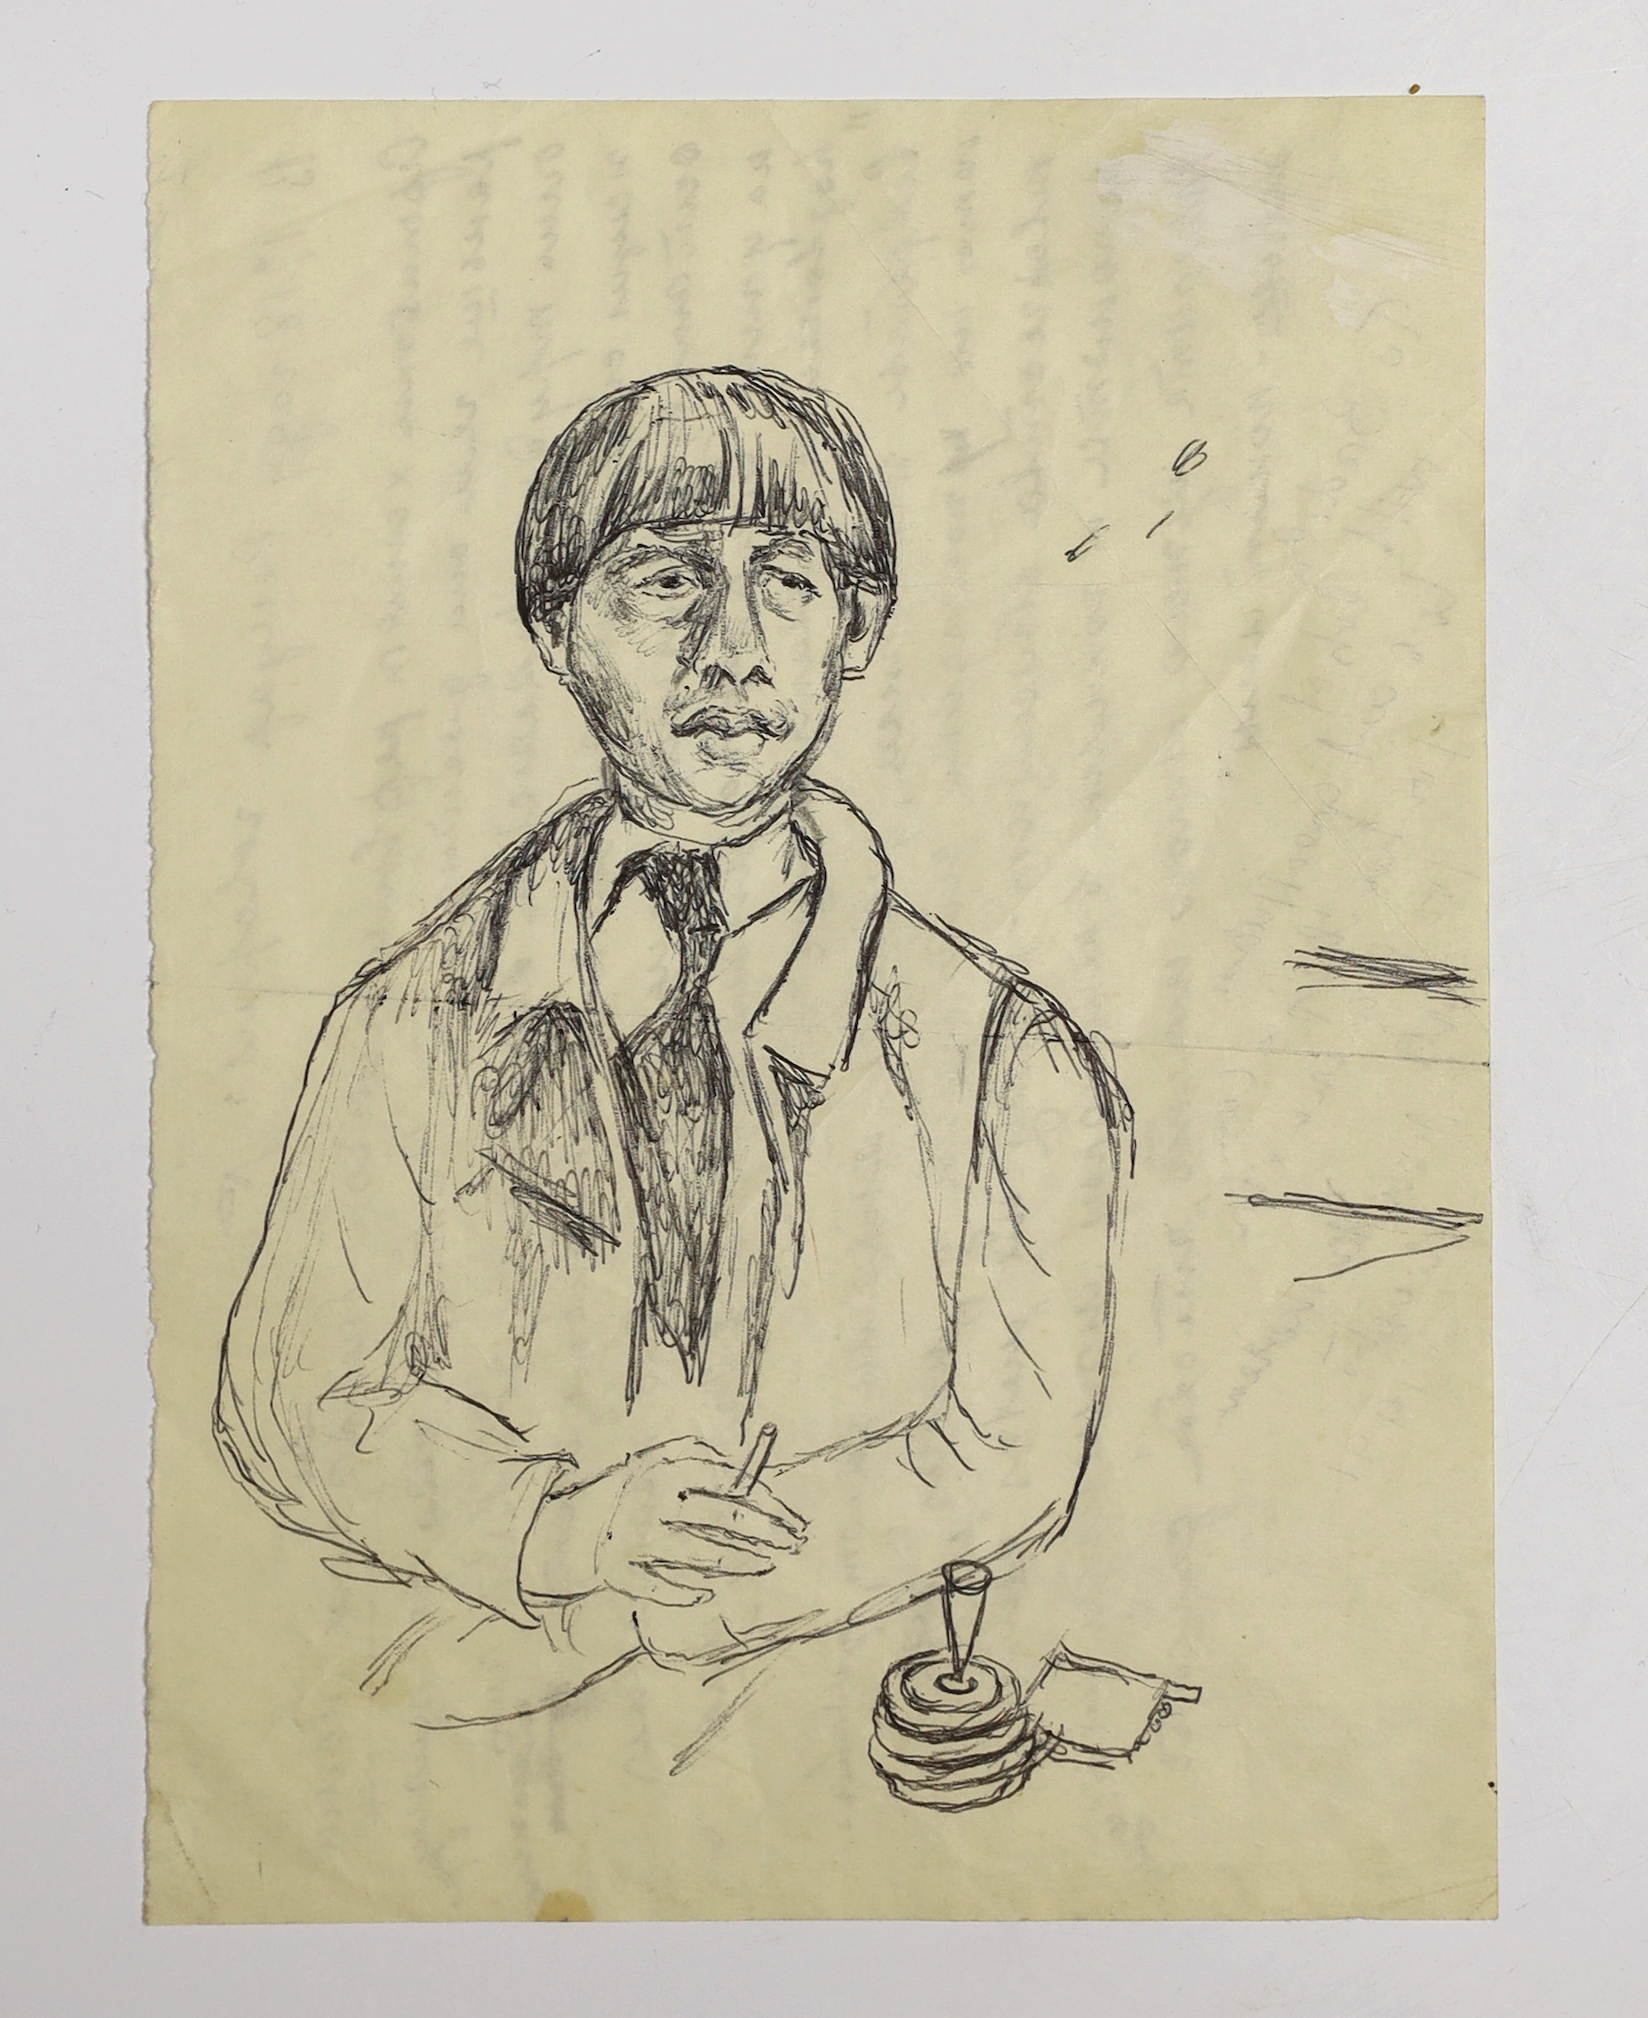 Chaim Soutine interest; a portrait in pen on paper (believed to be either a self-portrait or a portrait of him by Marie Marevna as a contemporary addition to the letter), the reverse with an autograph love letter in penc